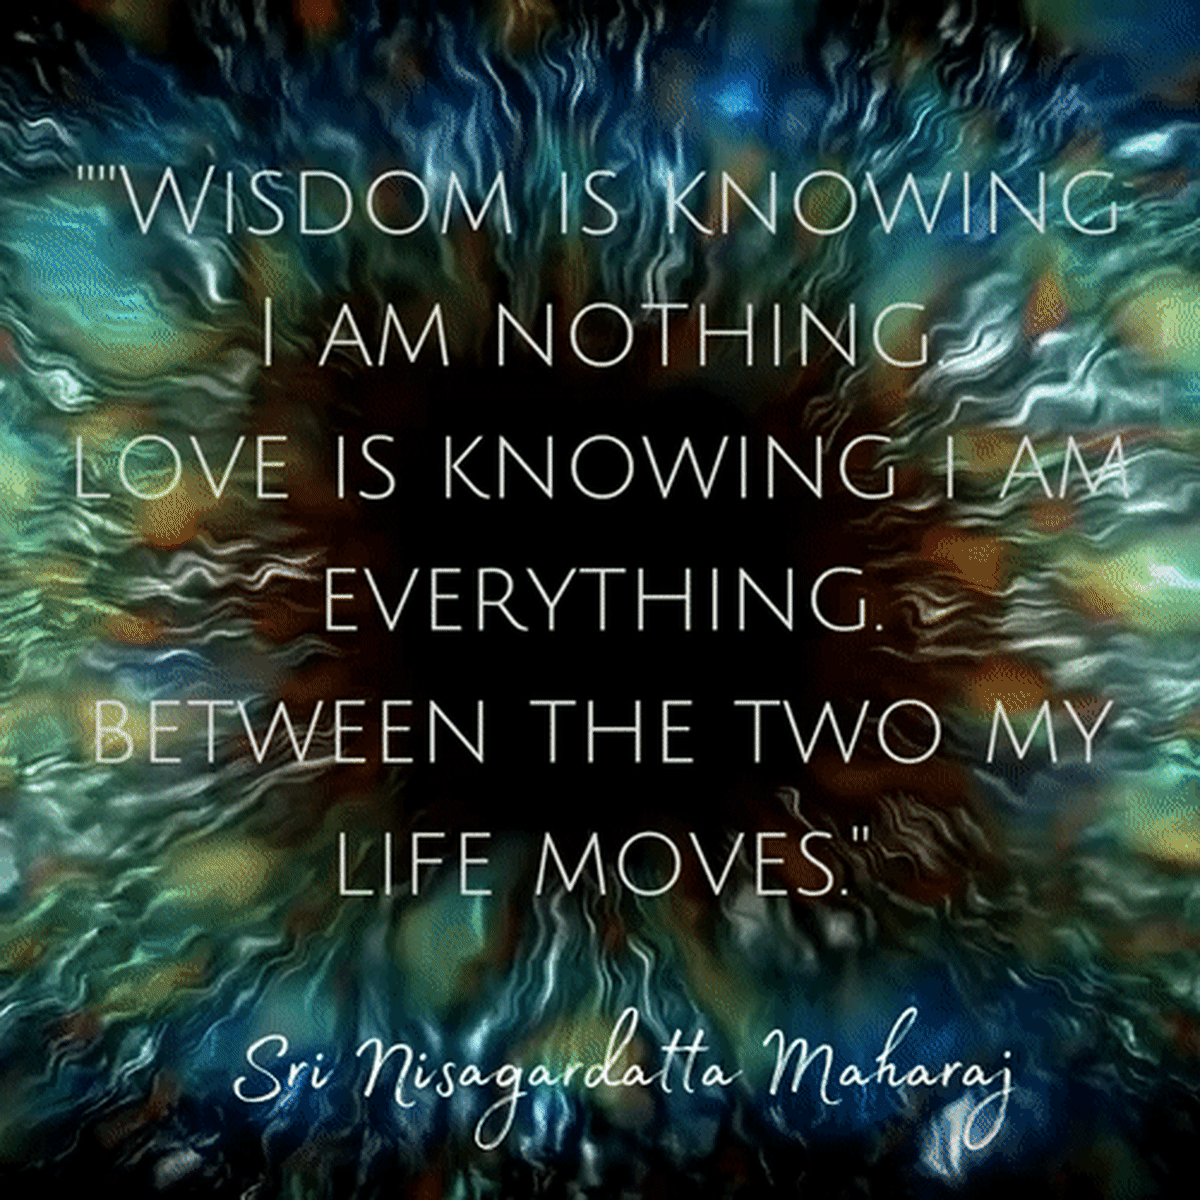 “Wisdom is knowing I am nothing, Love is knowing I am everything, and between the two my life moves.”